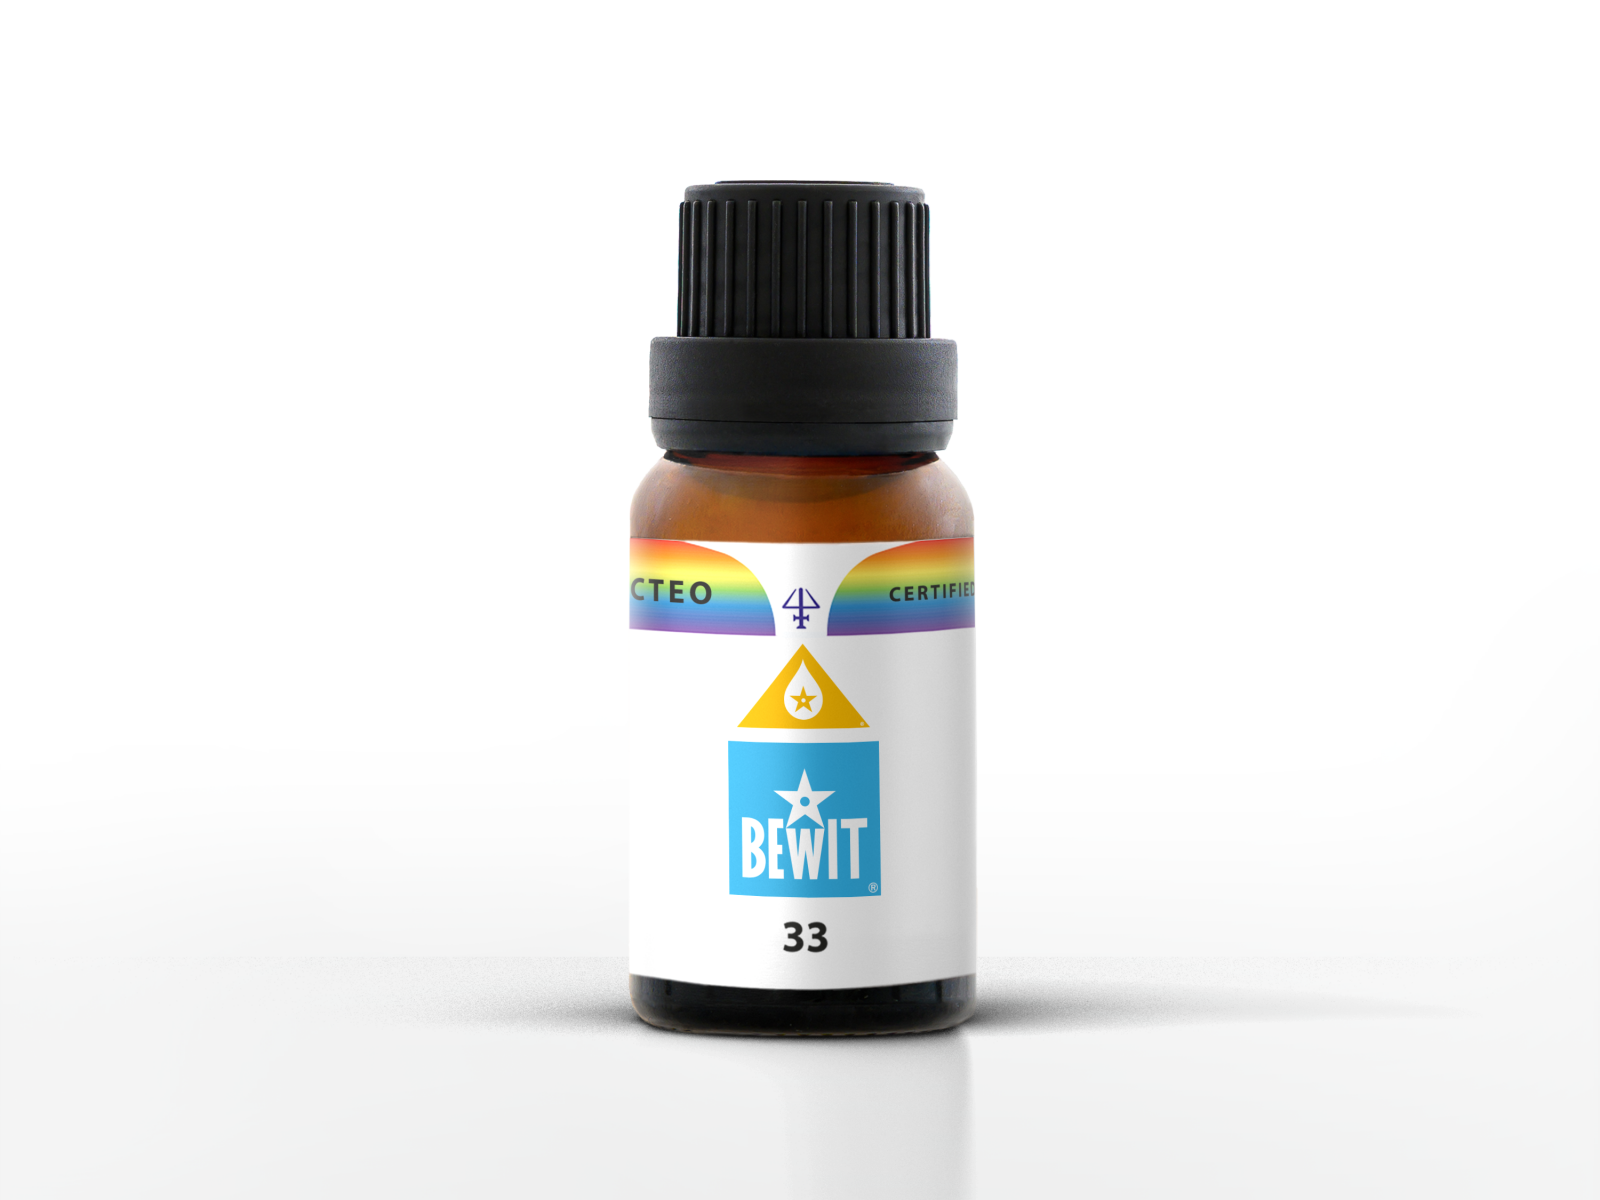 BEWIT 33 - Blend of the essential oils - 1